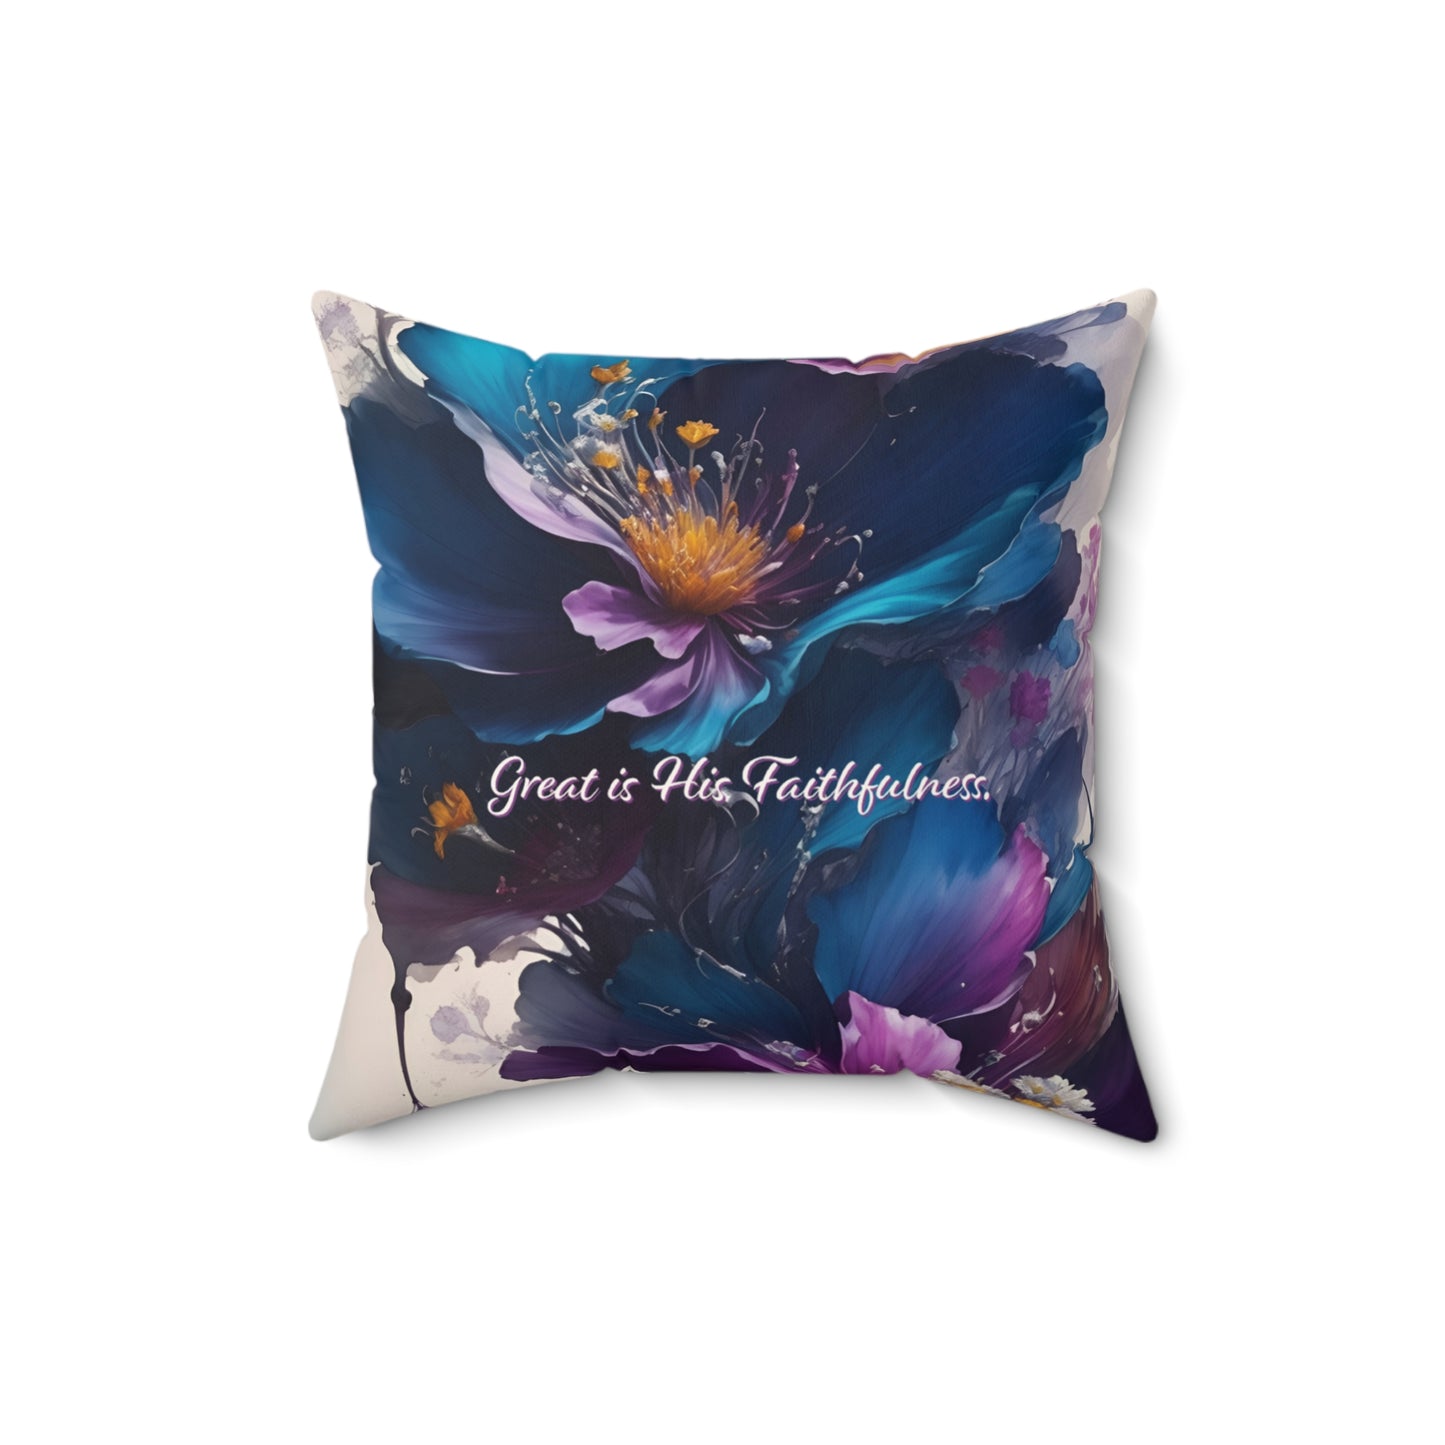 Spun Polyester Square Pillow - Great Is His Faithfulness